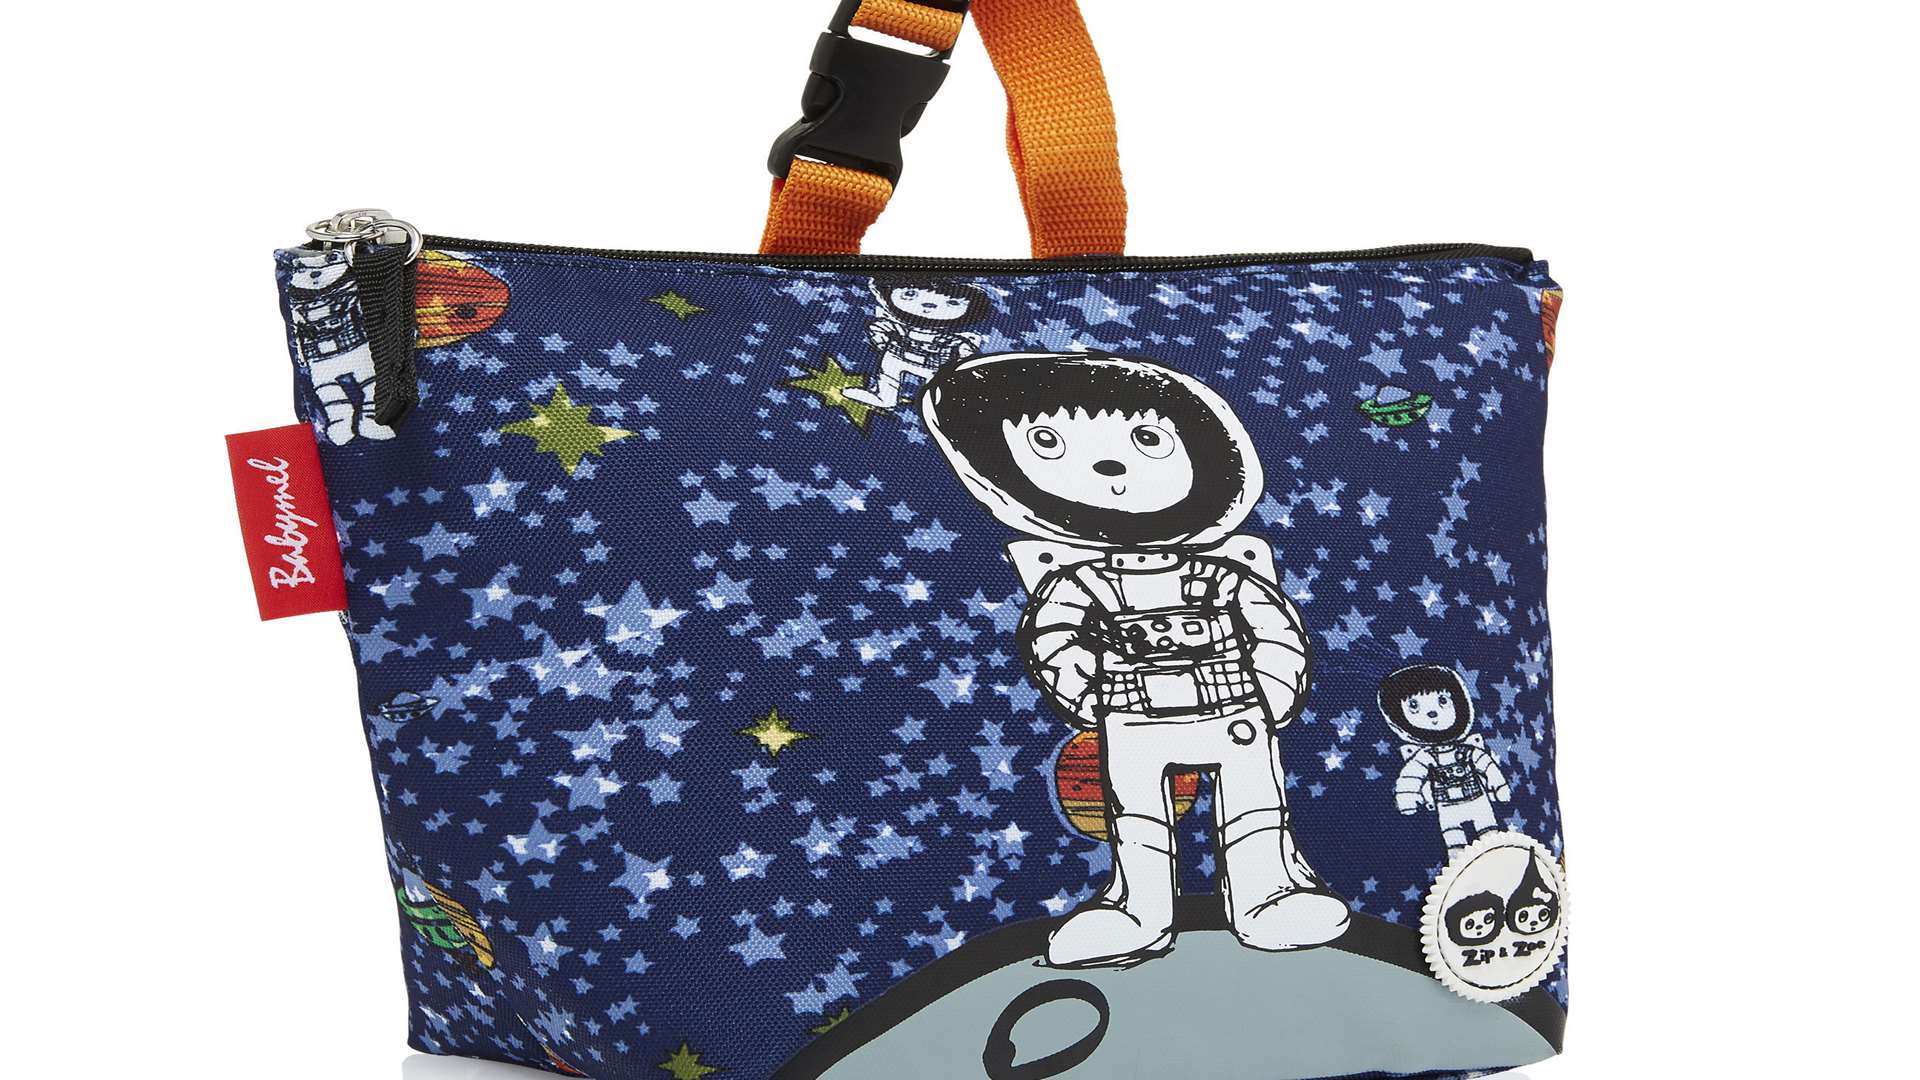 Zip And Zoe Spaceman Lunch Bag, £13.95, at Five Boys Clothing at www.fiveboysclothing.com